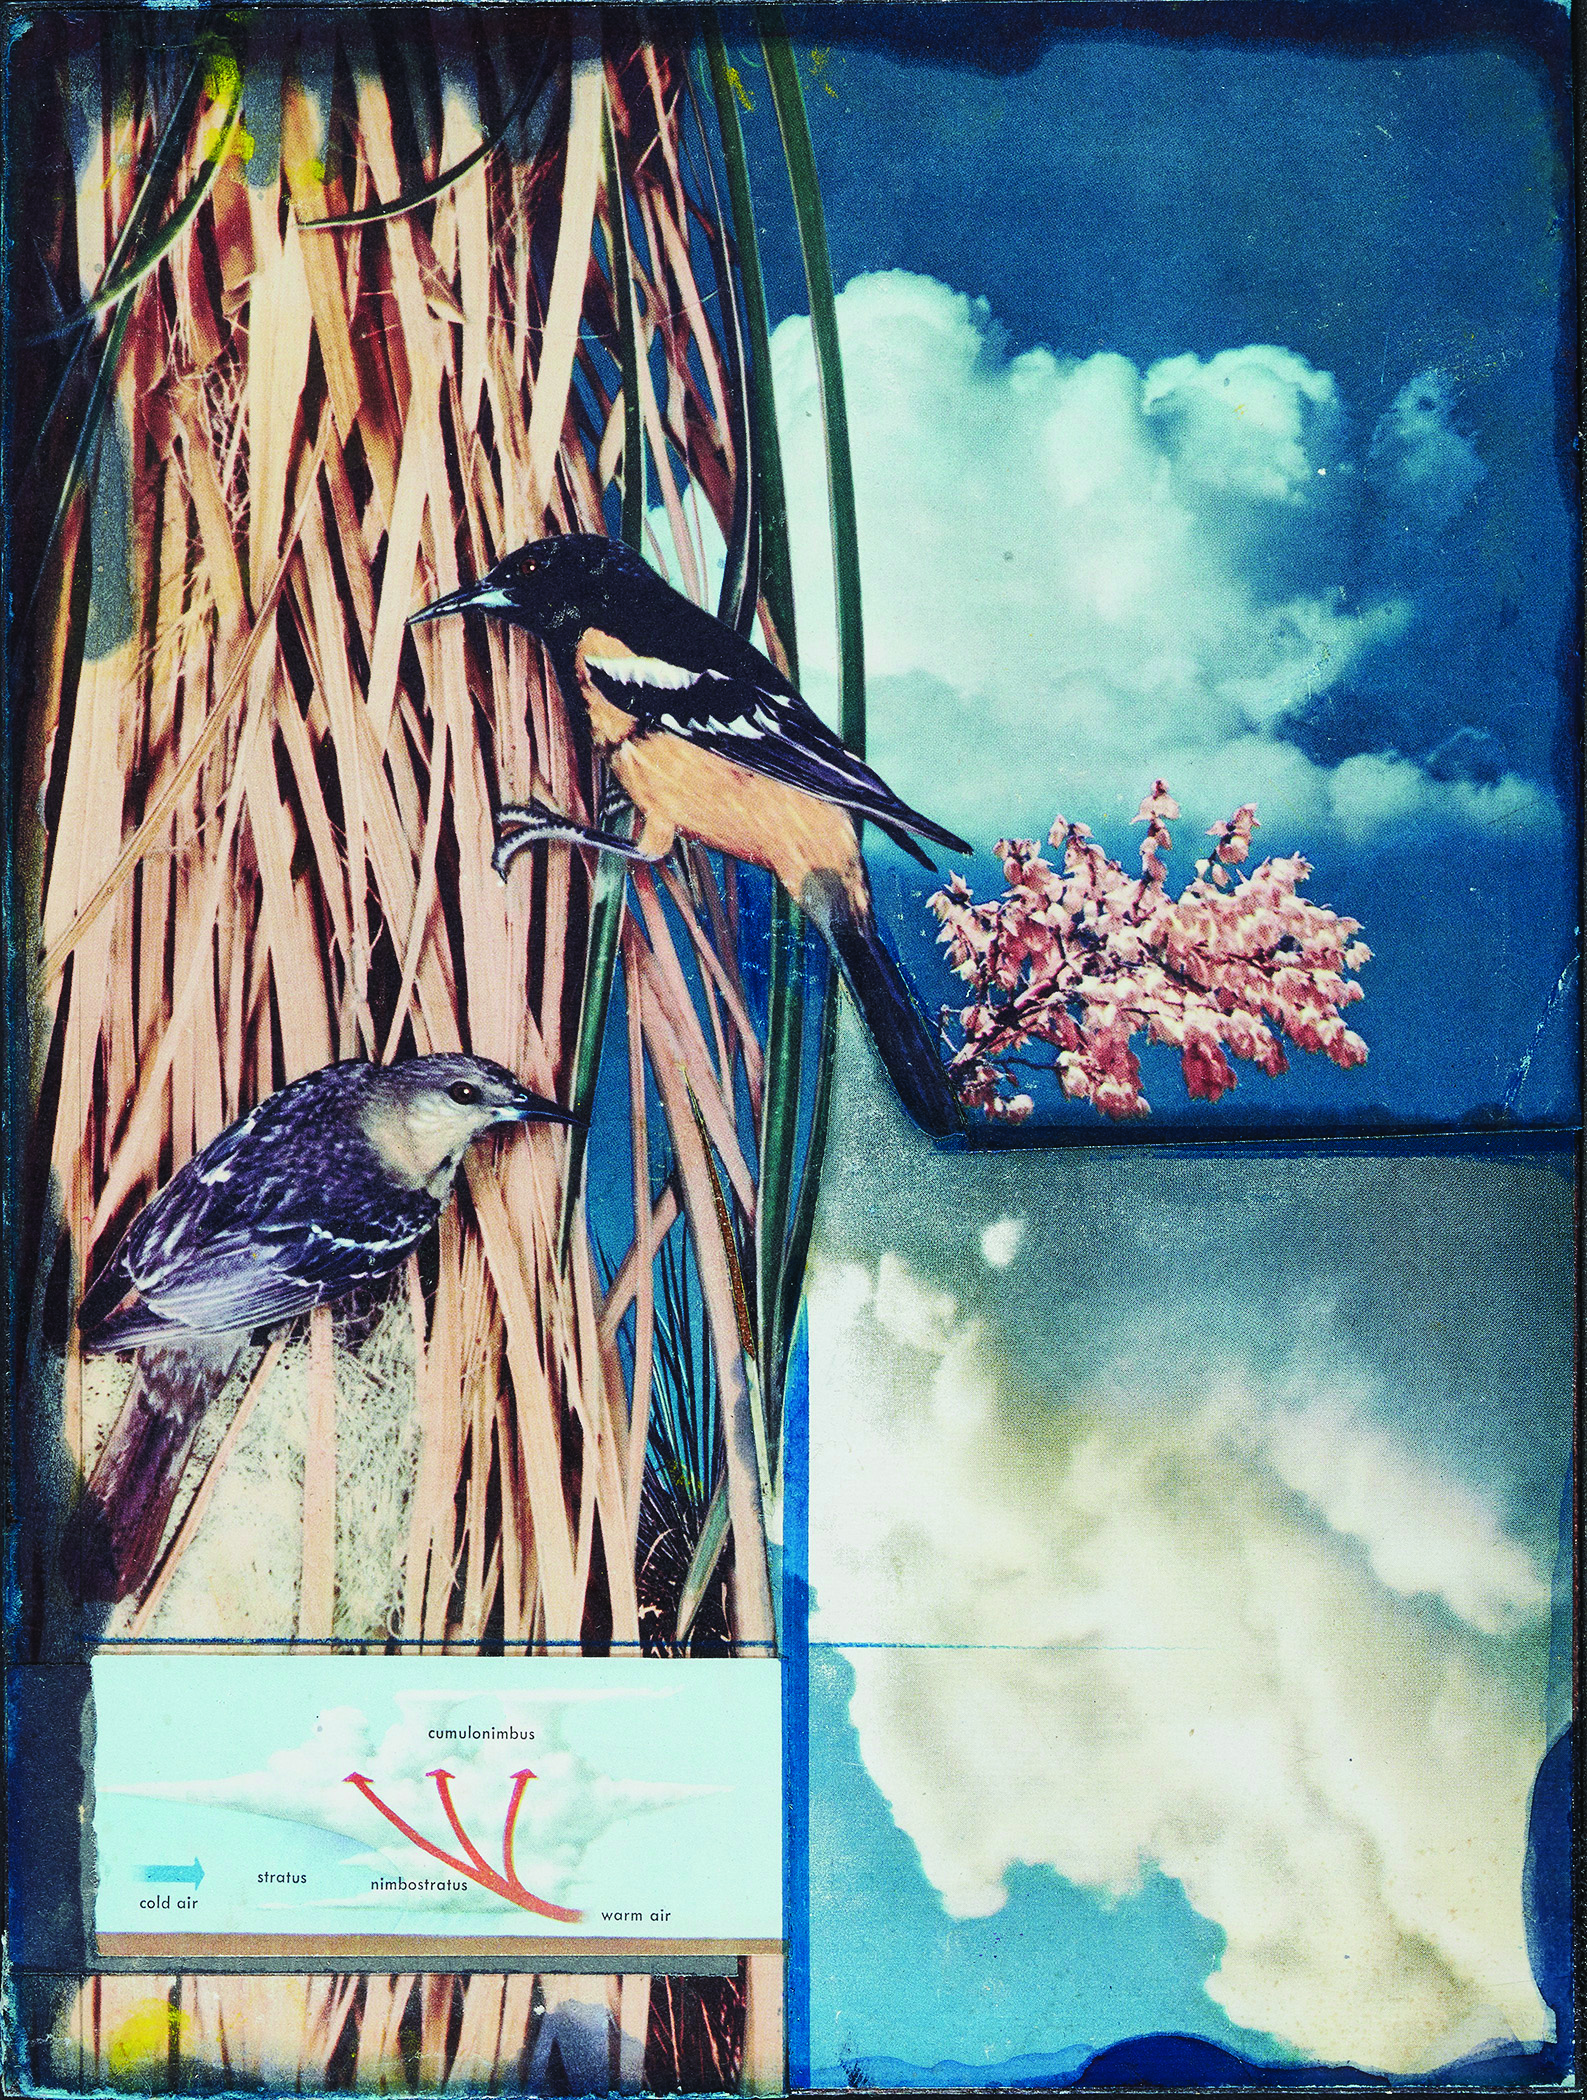 A Joseph Cornell collage that features two birds in the left half of the composition collaged on top of images of clouds and foliage.